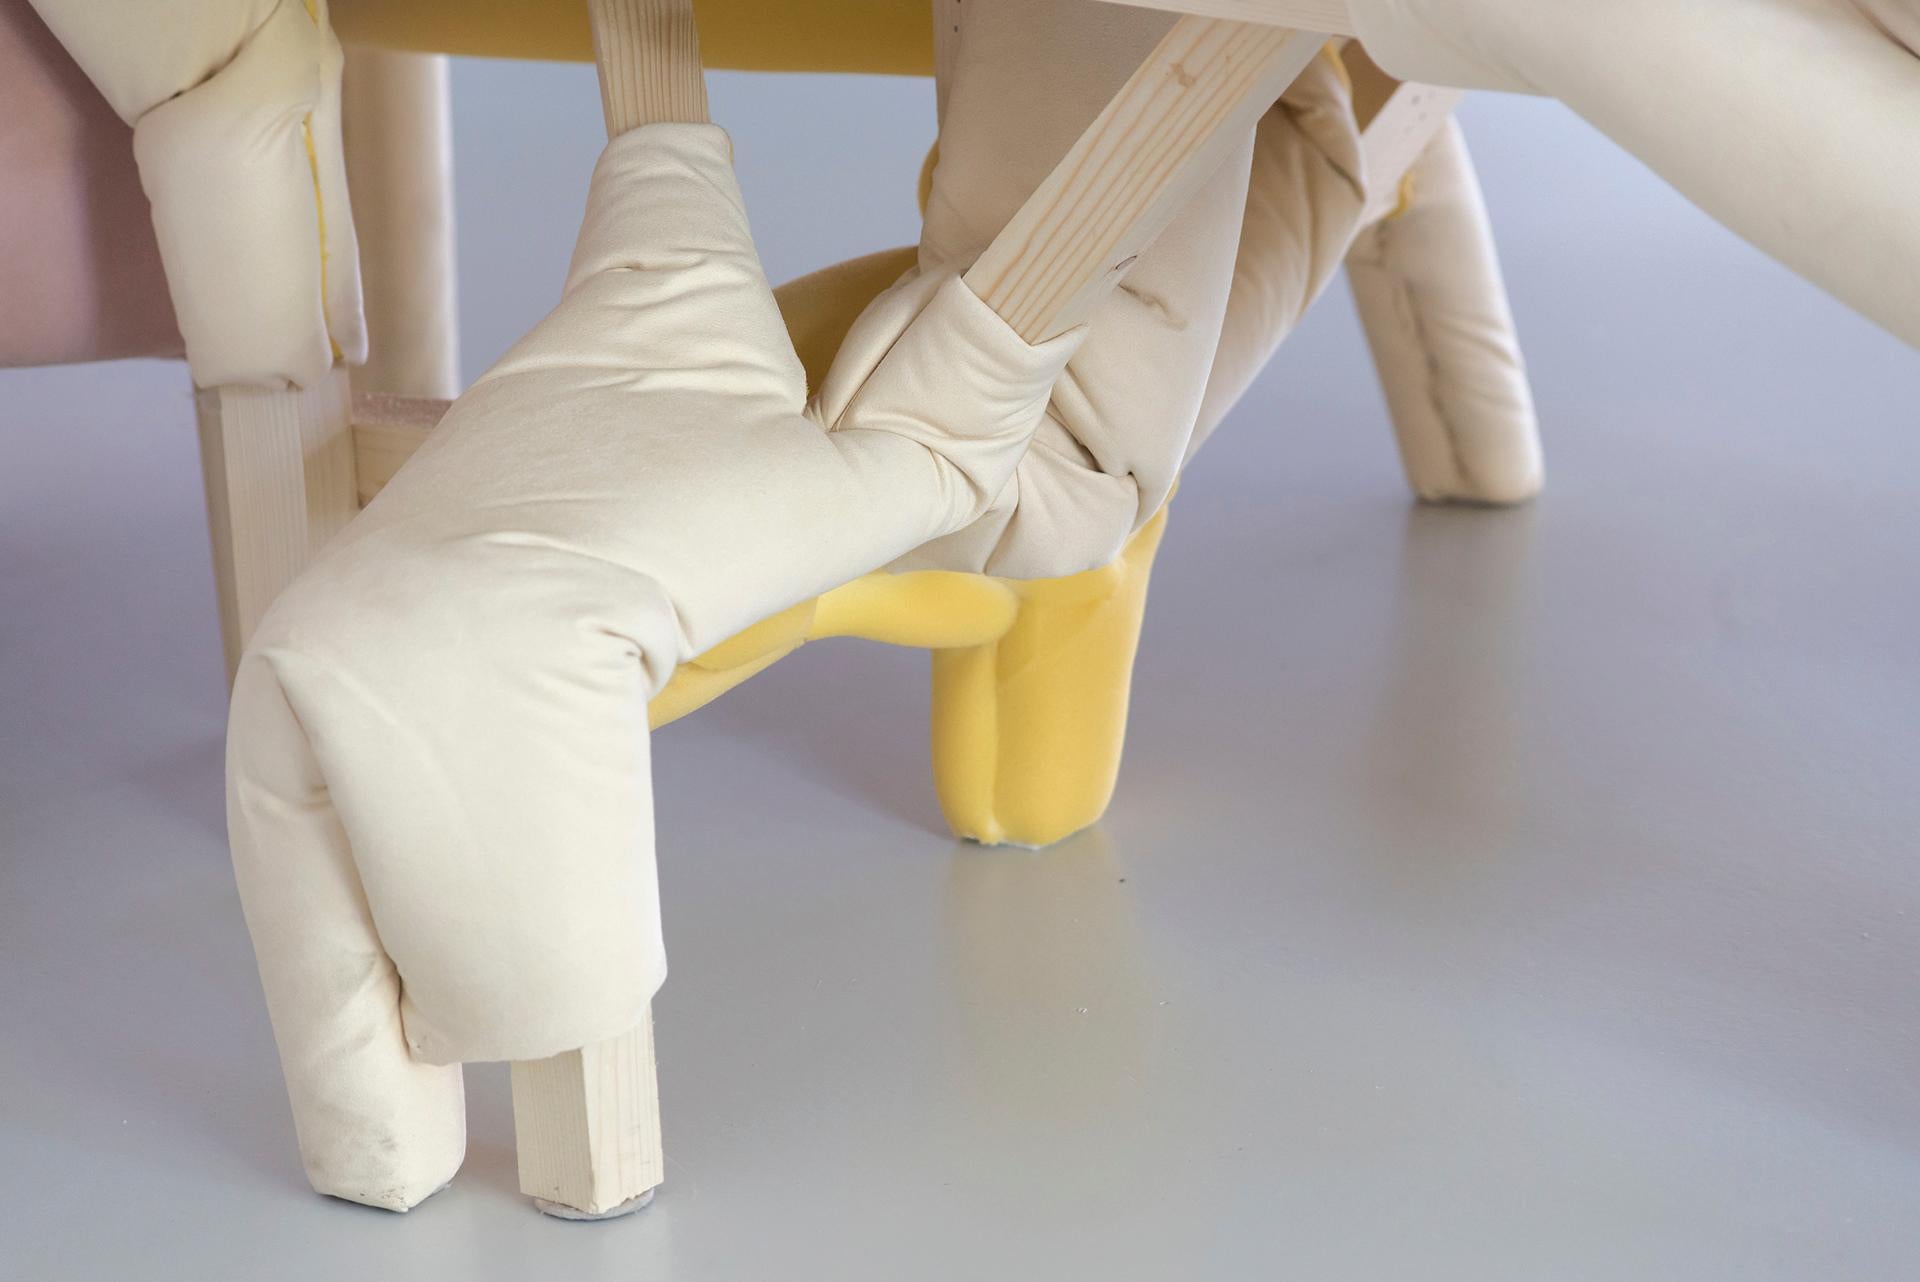 Ceramic Carlos Fernández Pello Contemporary Bench from the Series 